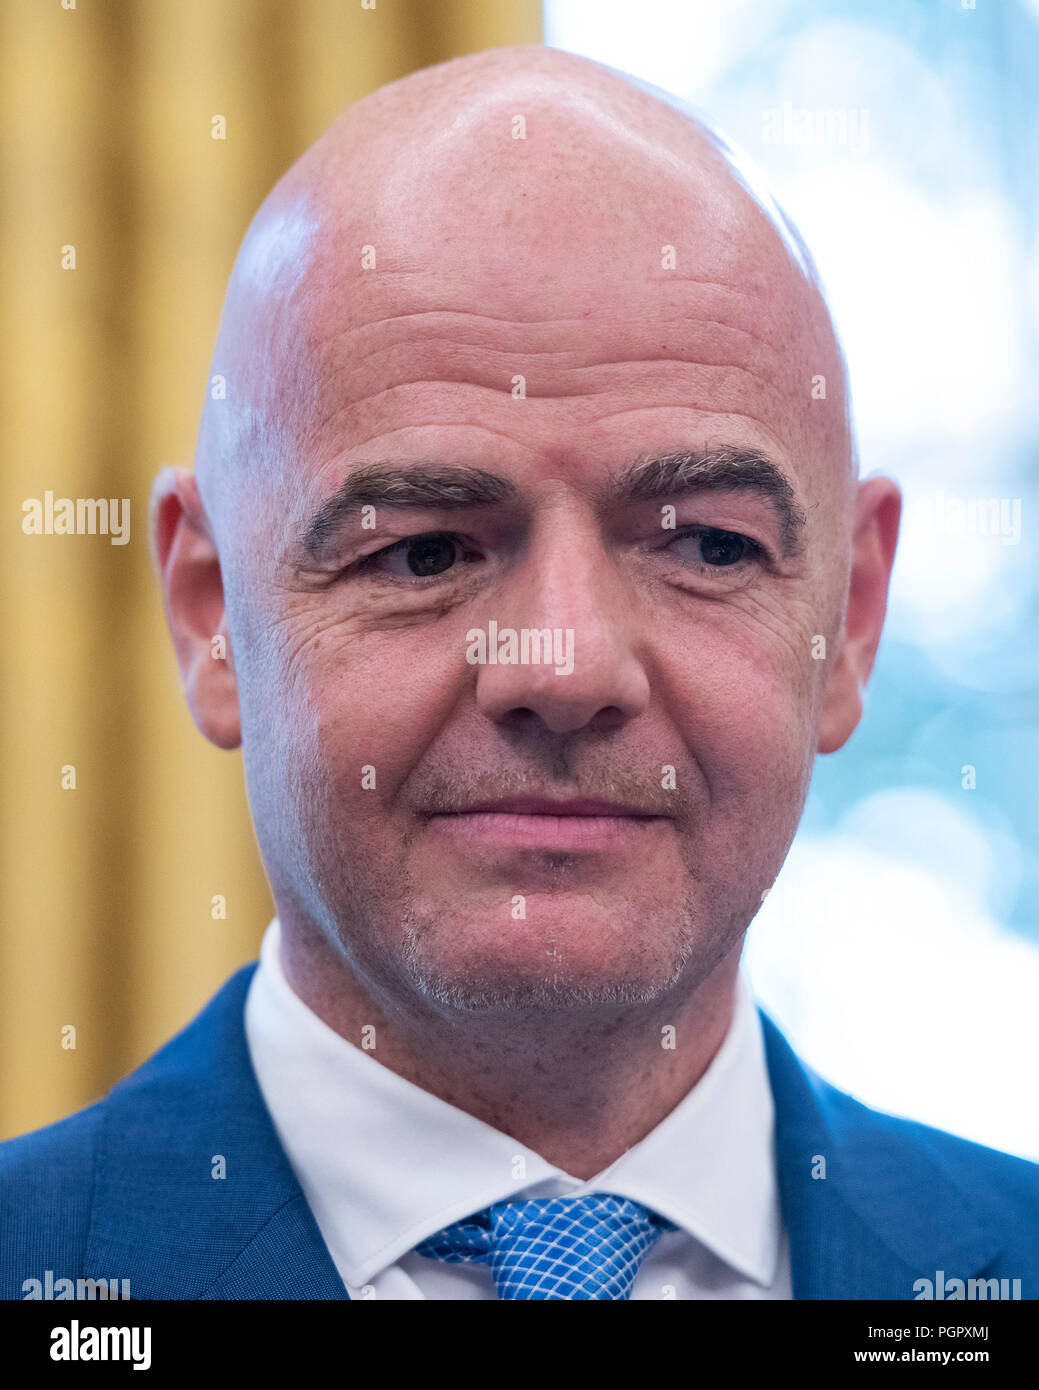 Gianni Infantino, President of Fédération Internationale de Football Association (FIFA) listens as United States President Donald J. Trump makes remarks in the Oval Office of the White House in Washington, DC on Tuesday, August 28, 2018. FIFA describes itself as an international governing body of association football, futsal, and beach soccer. Credit: Ron Sachs/CNP /MediaPunch Stock Photo